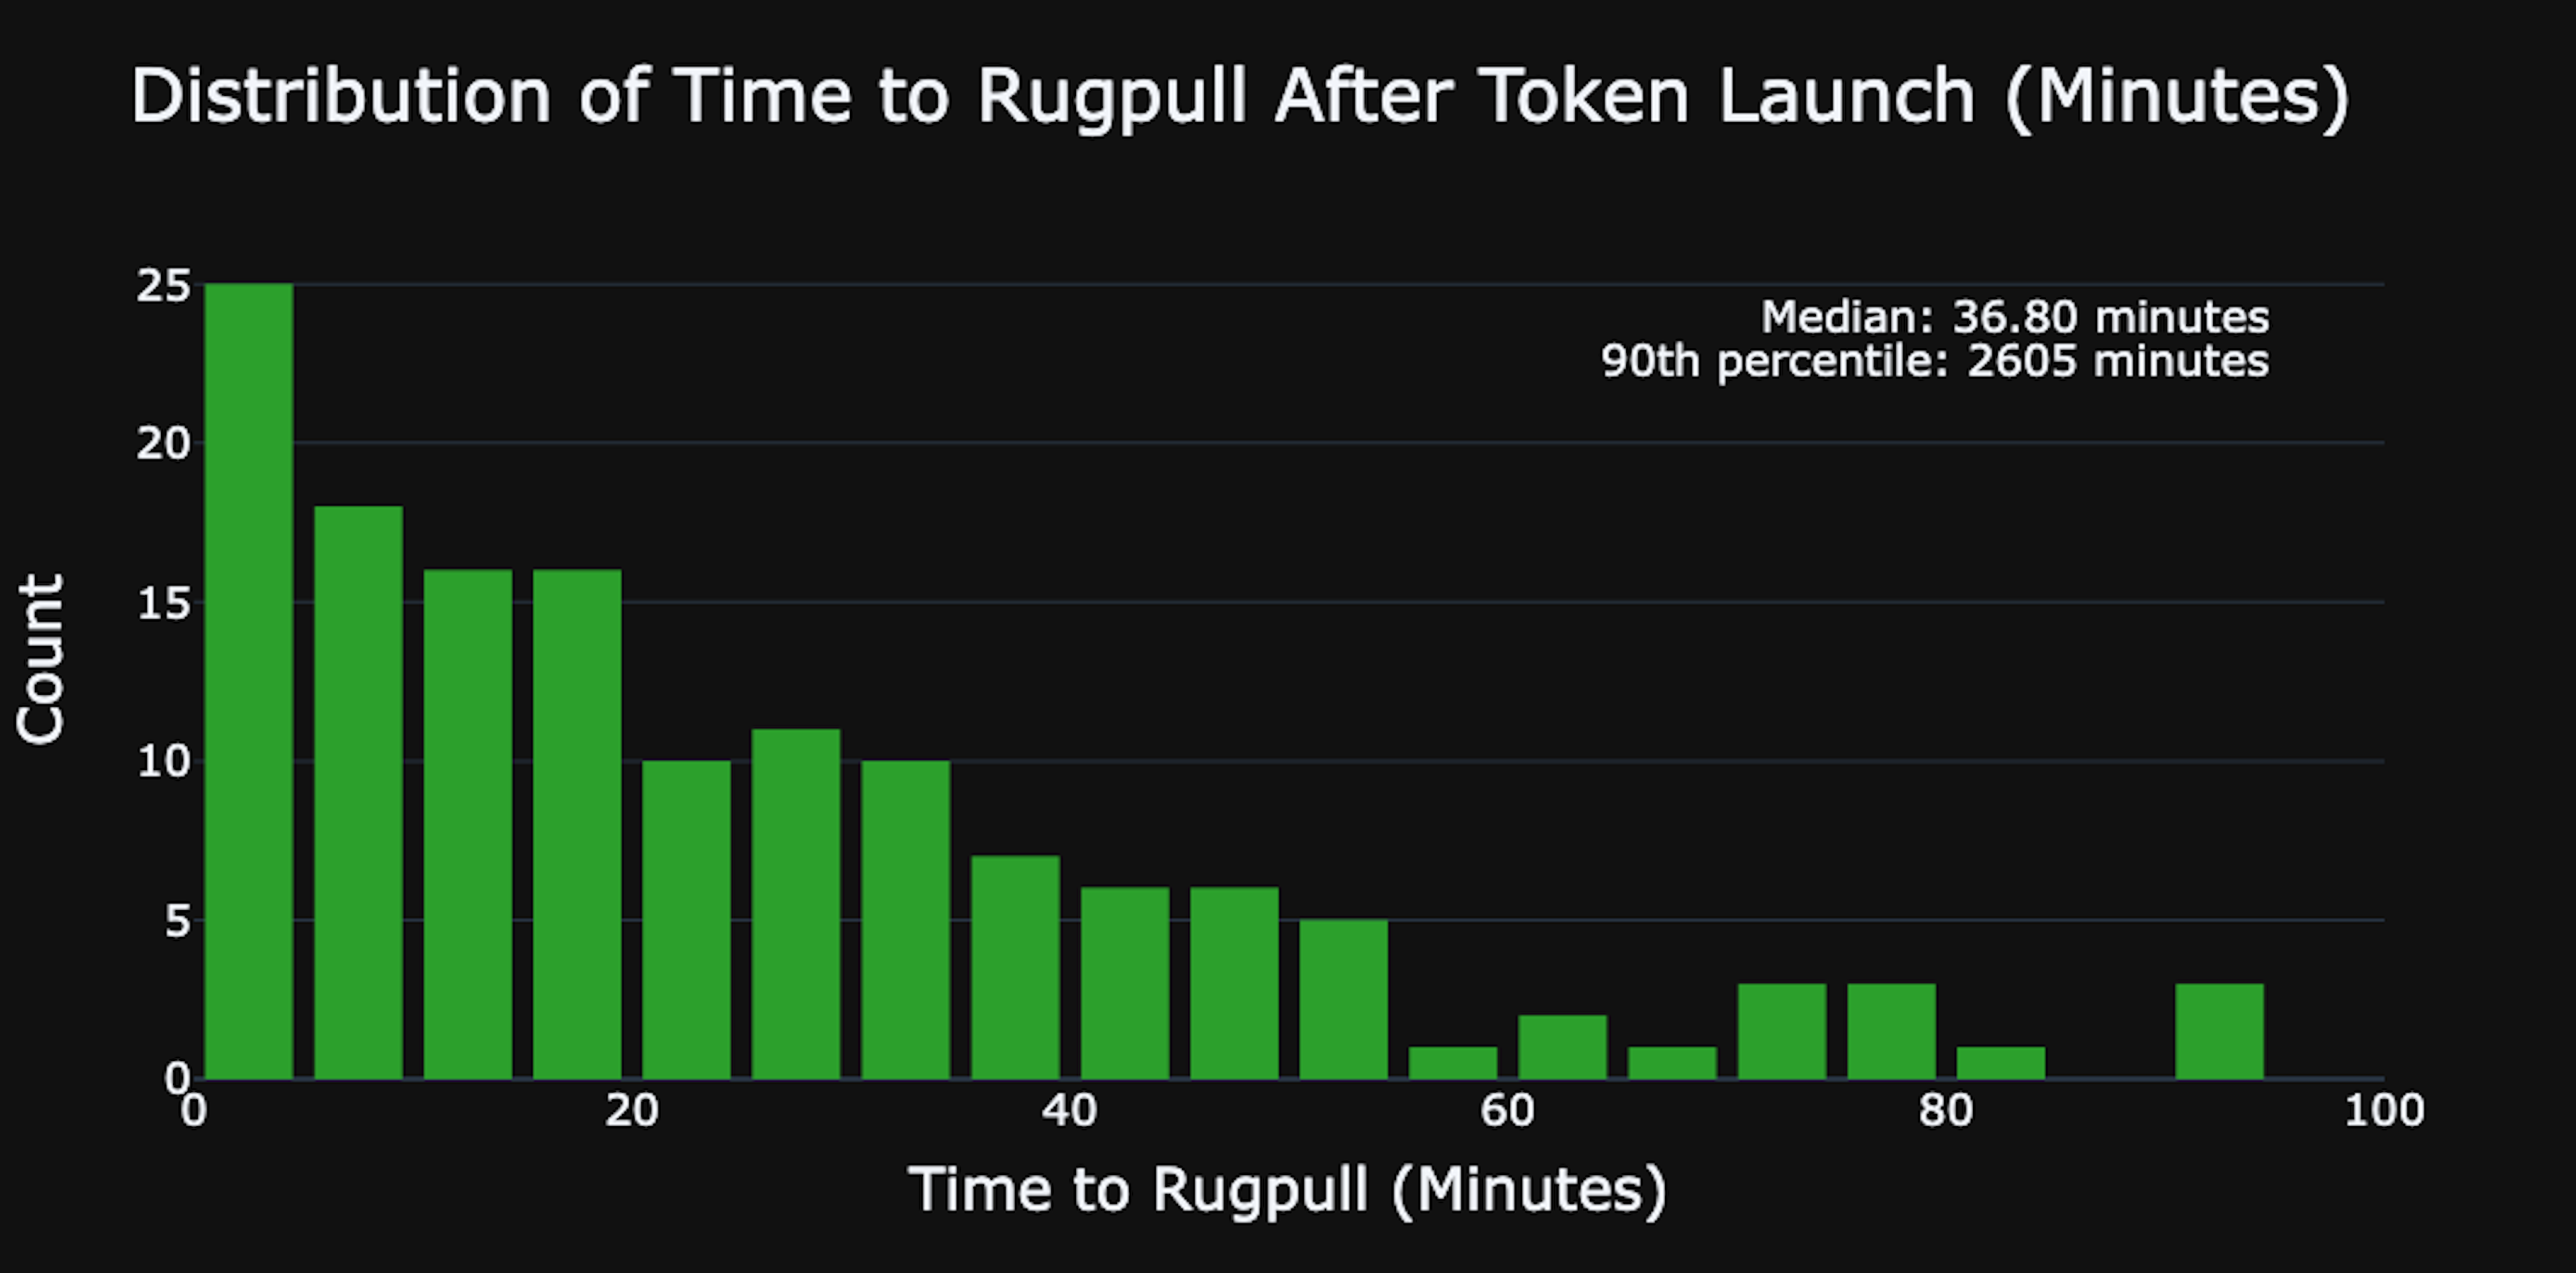 Distribution of time to rugpull based on token launch